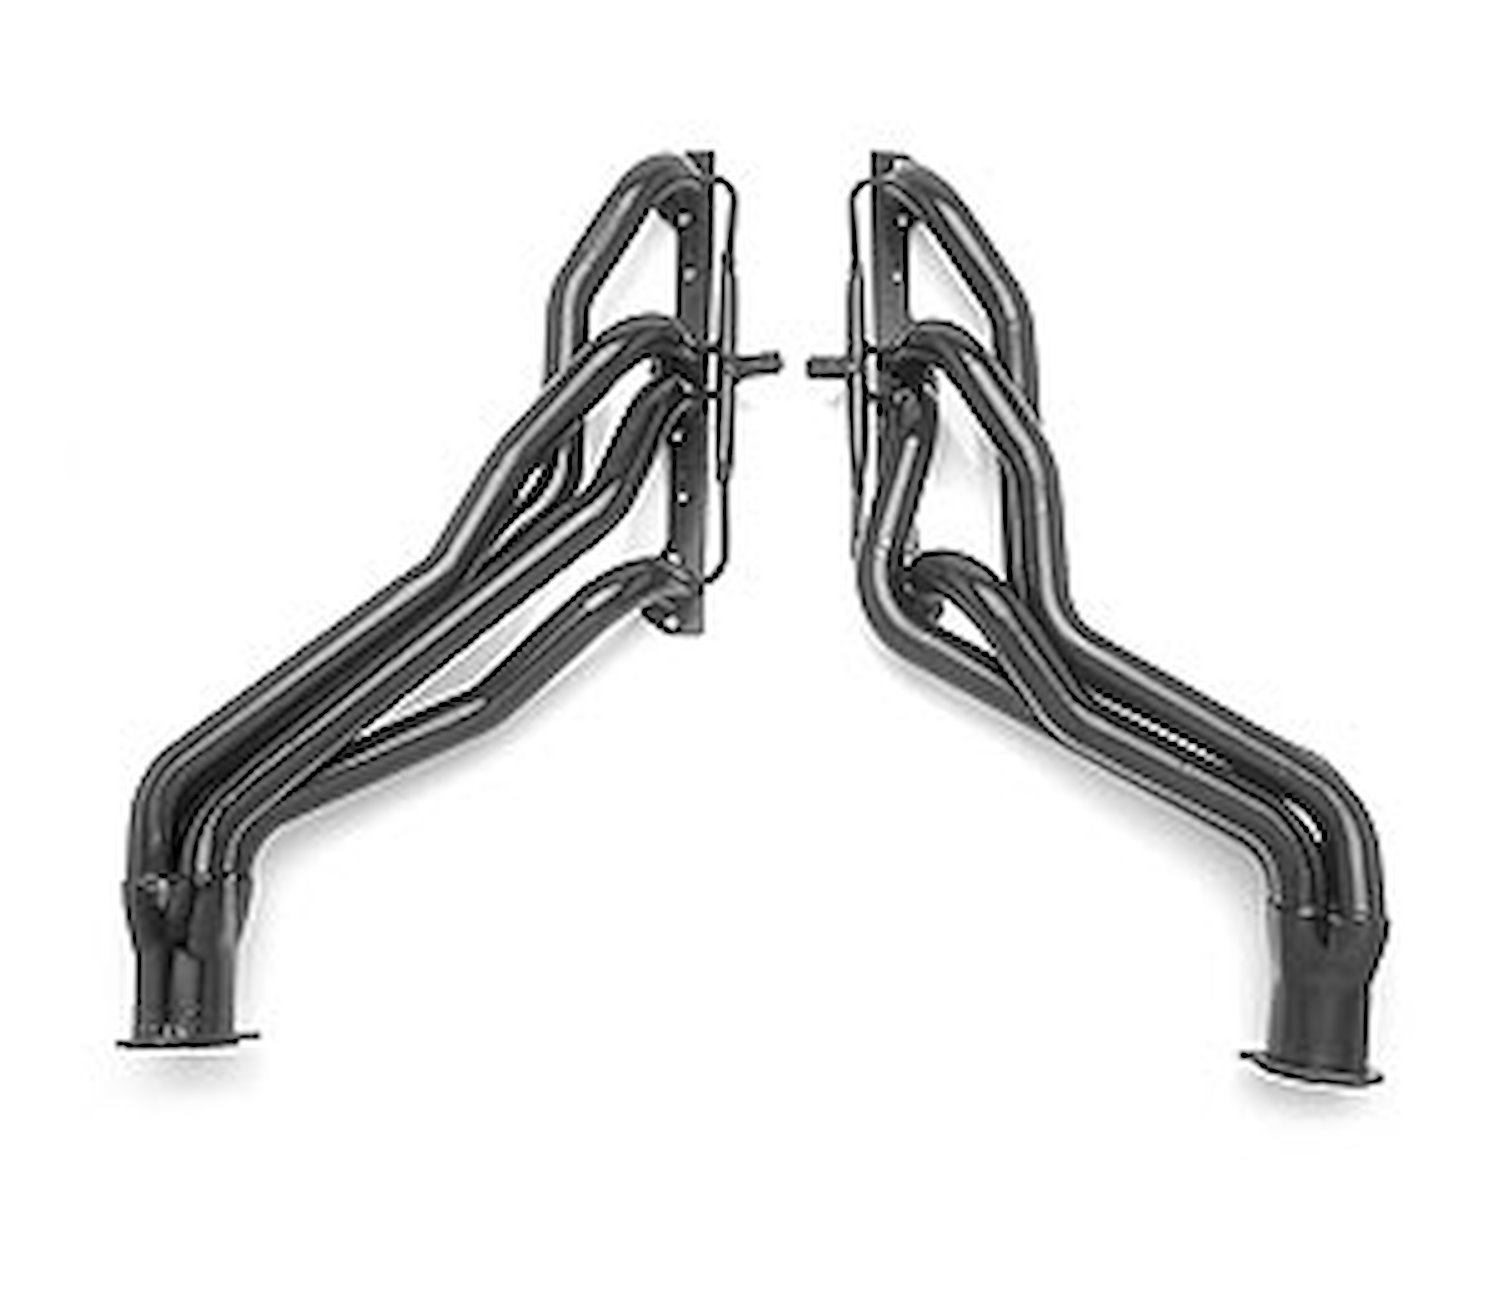 Standard Duty Uncoated Full Length Headers for 1988-95 Chevy Pickup C1500-V3500 2WD/4WD